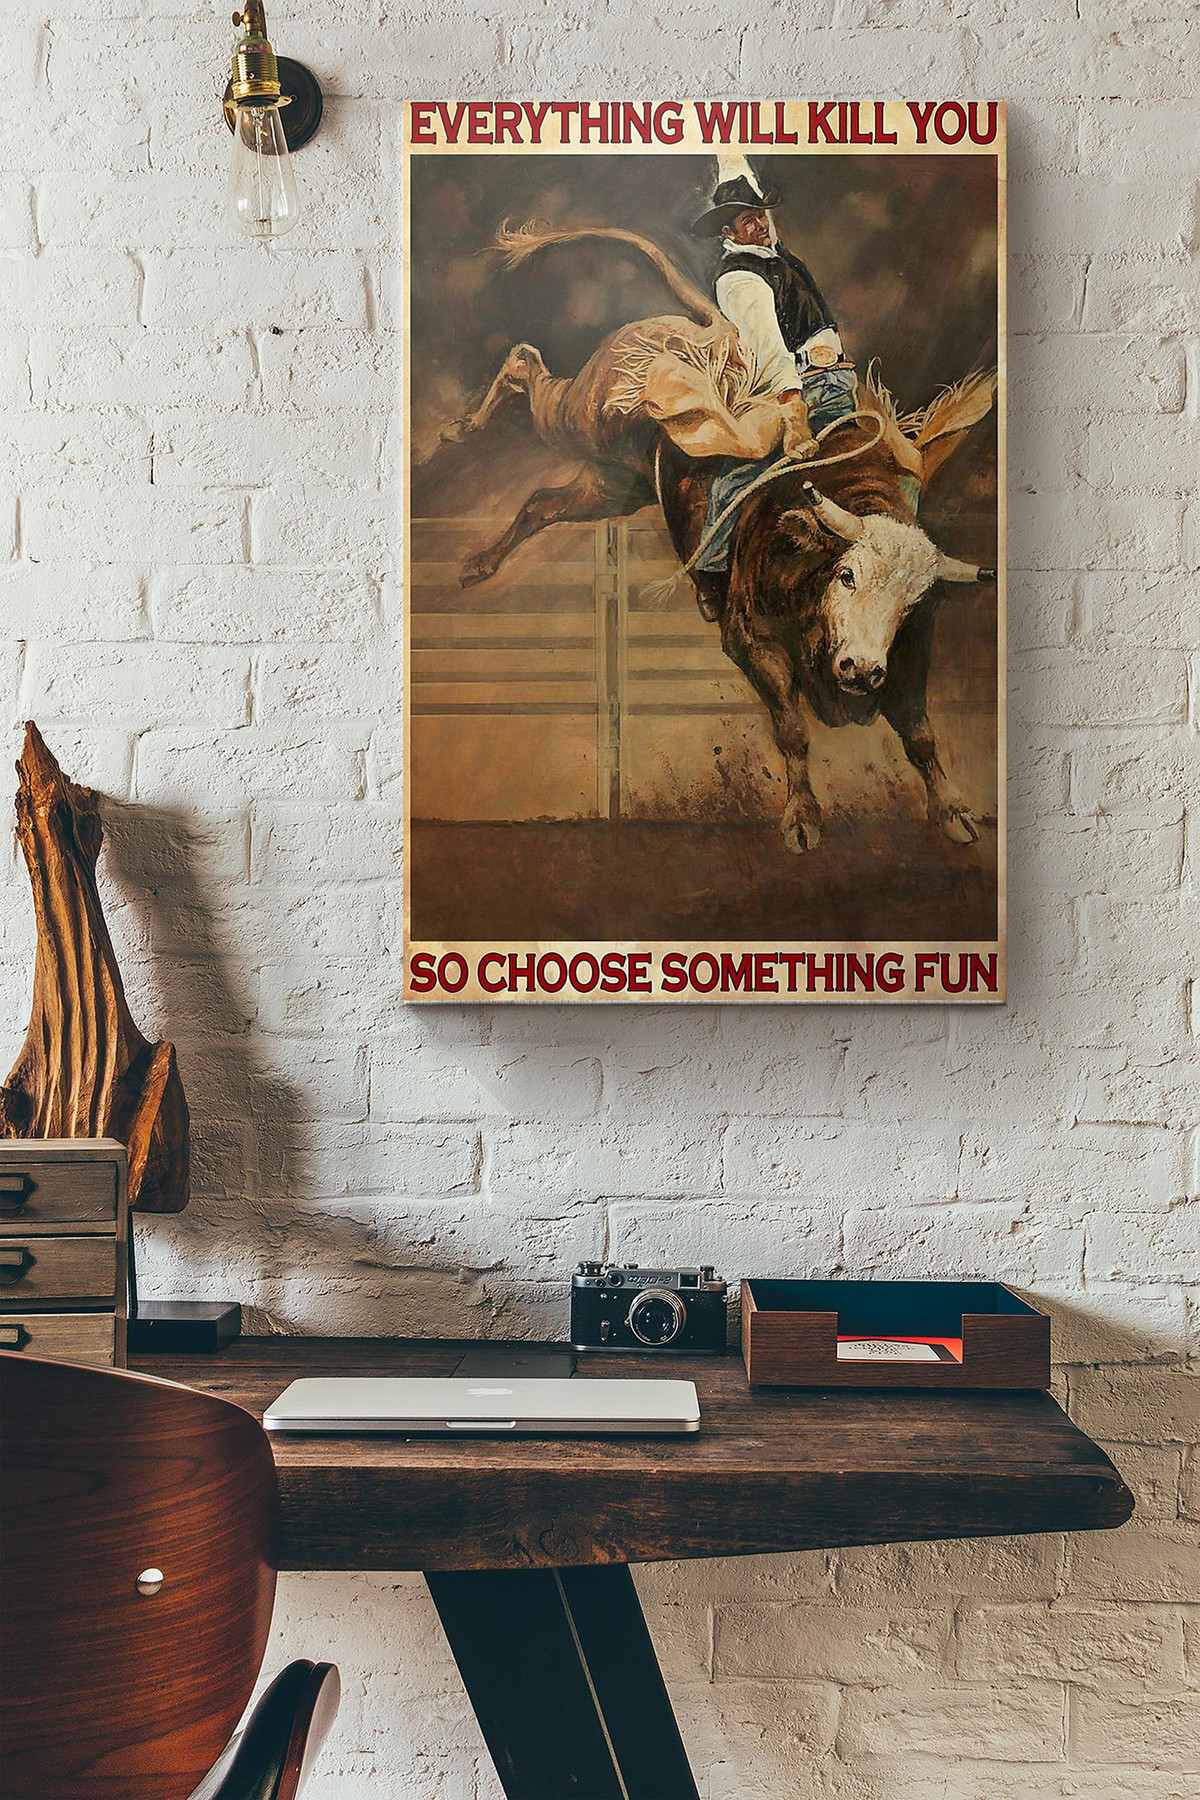 Bull Riding Rodeo Everything Will Kill You So Choose Something Fun Canvas Painting Ideas, Canvas Hanging Prints, Gift Idea Framed Prints, Canvas Paintings Wrapped Canvas 8x10